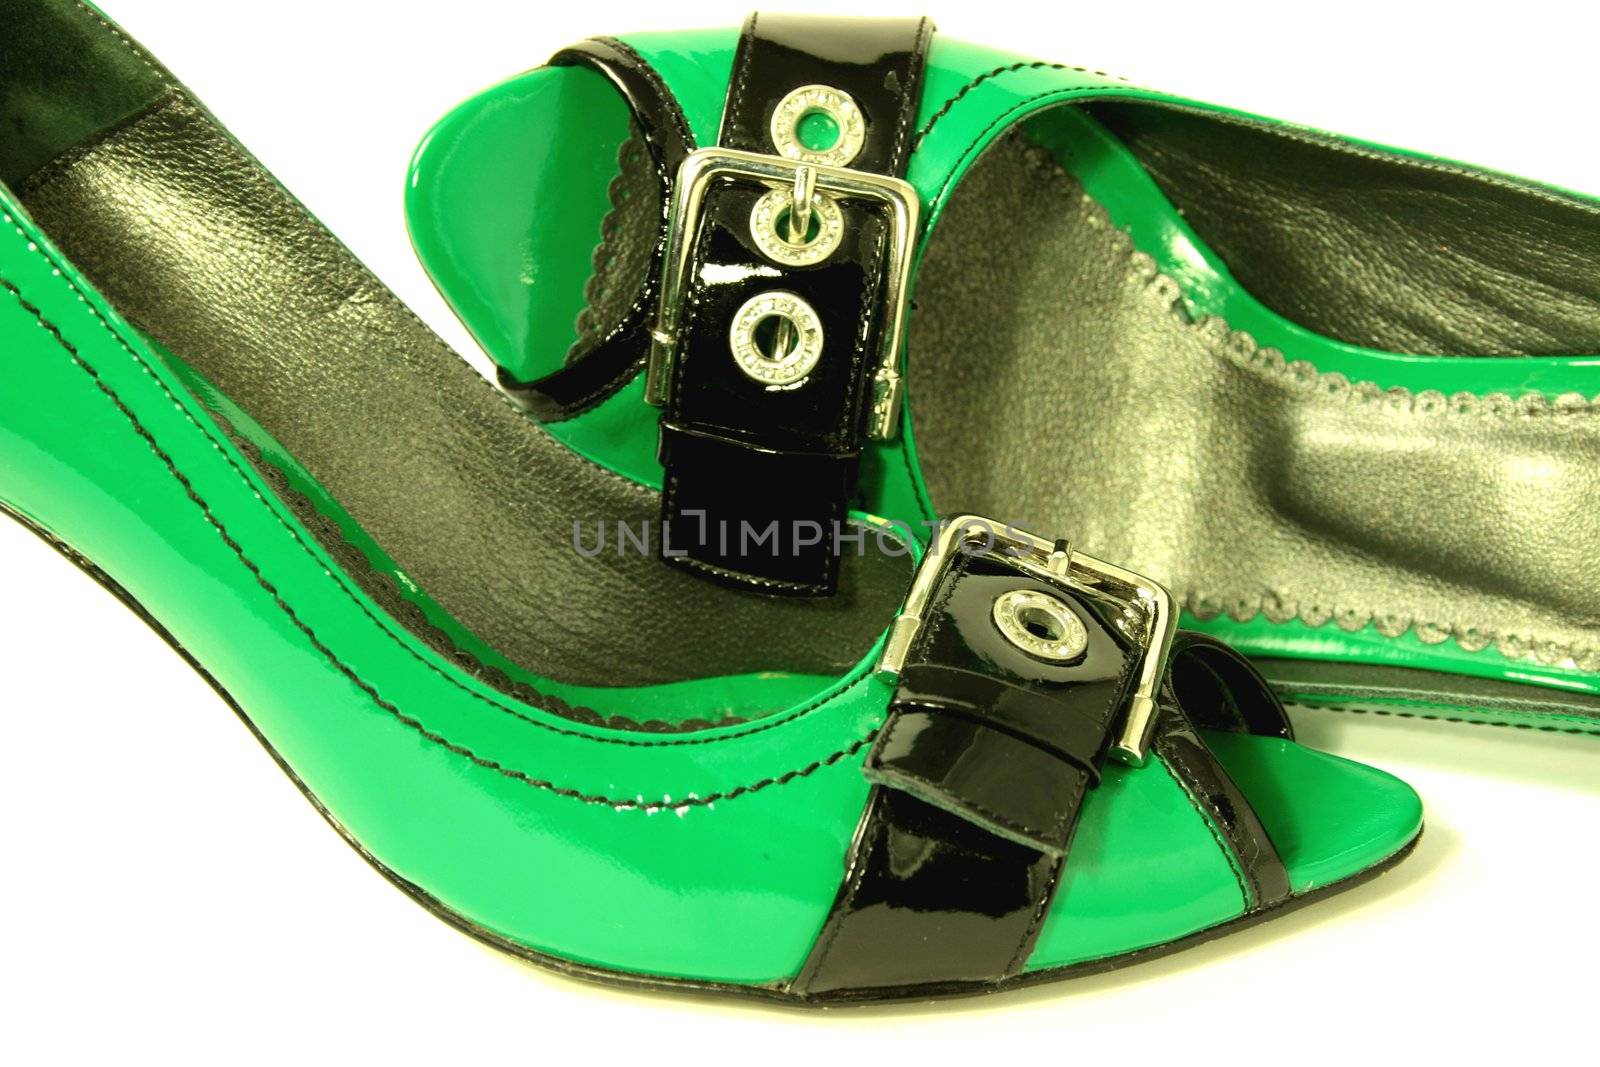 Green High-Heeled Shoes Close-up on white background. Series